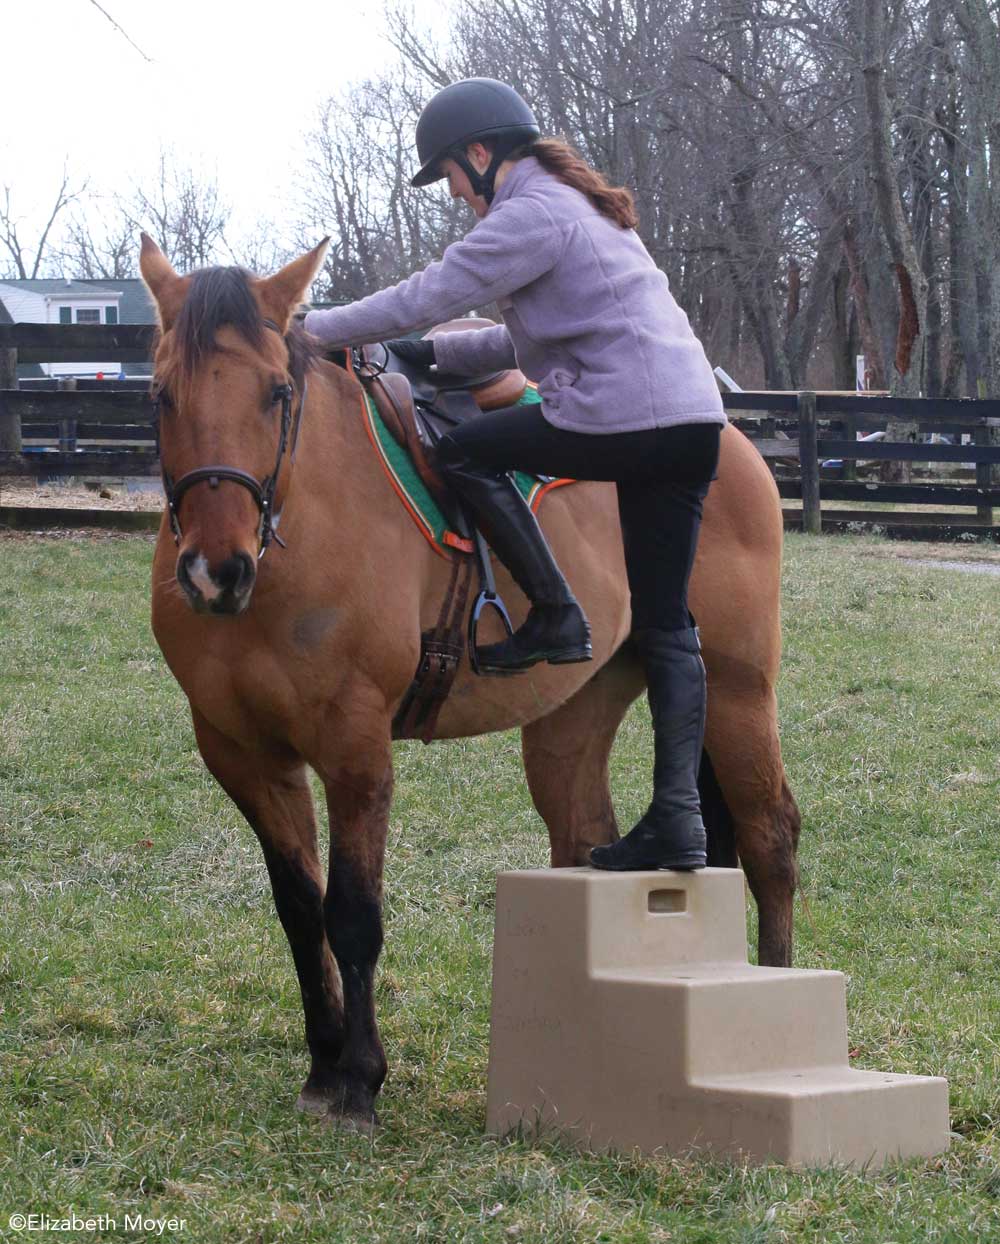 Mounting from a mounting block